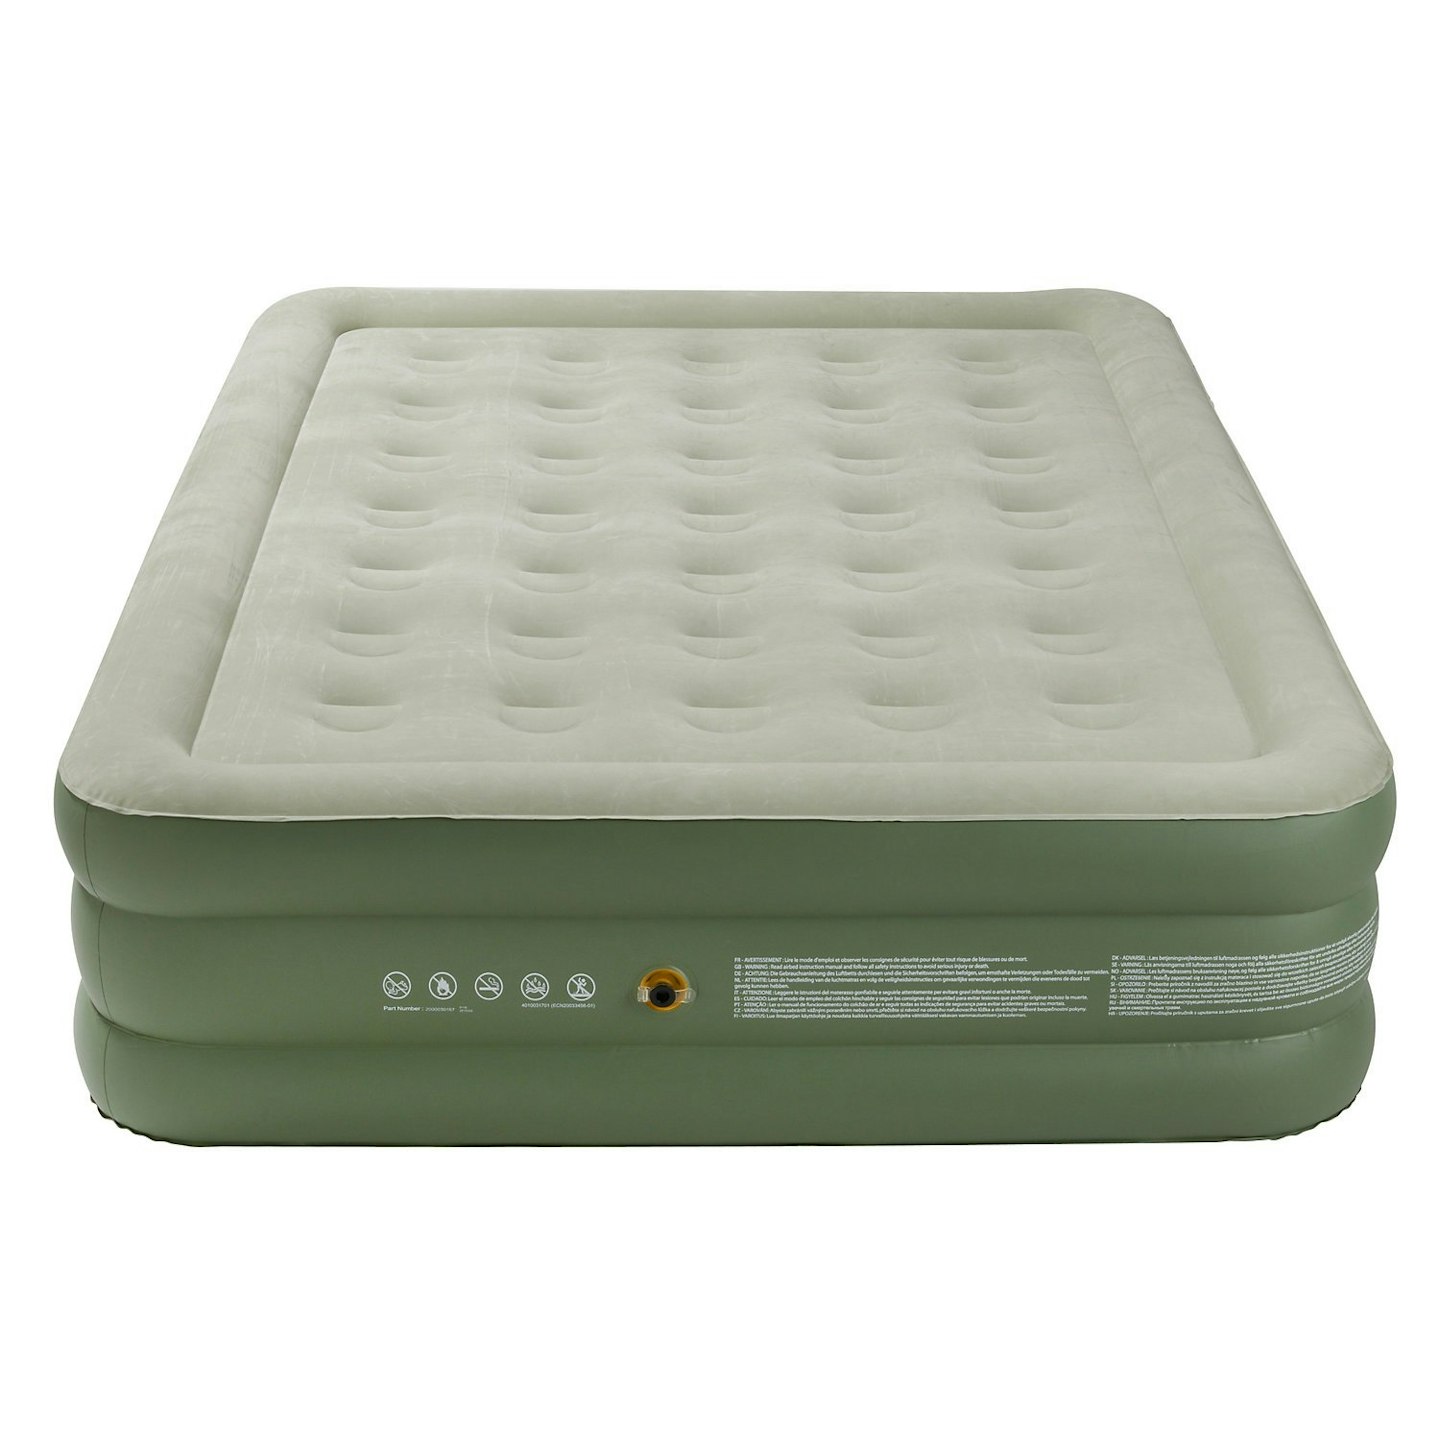 Coleman Maxi Comfort Raised King Airbed